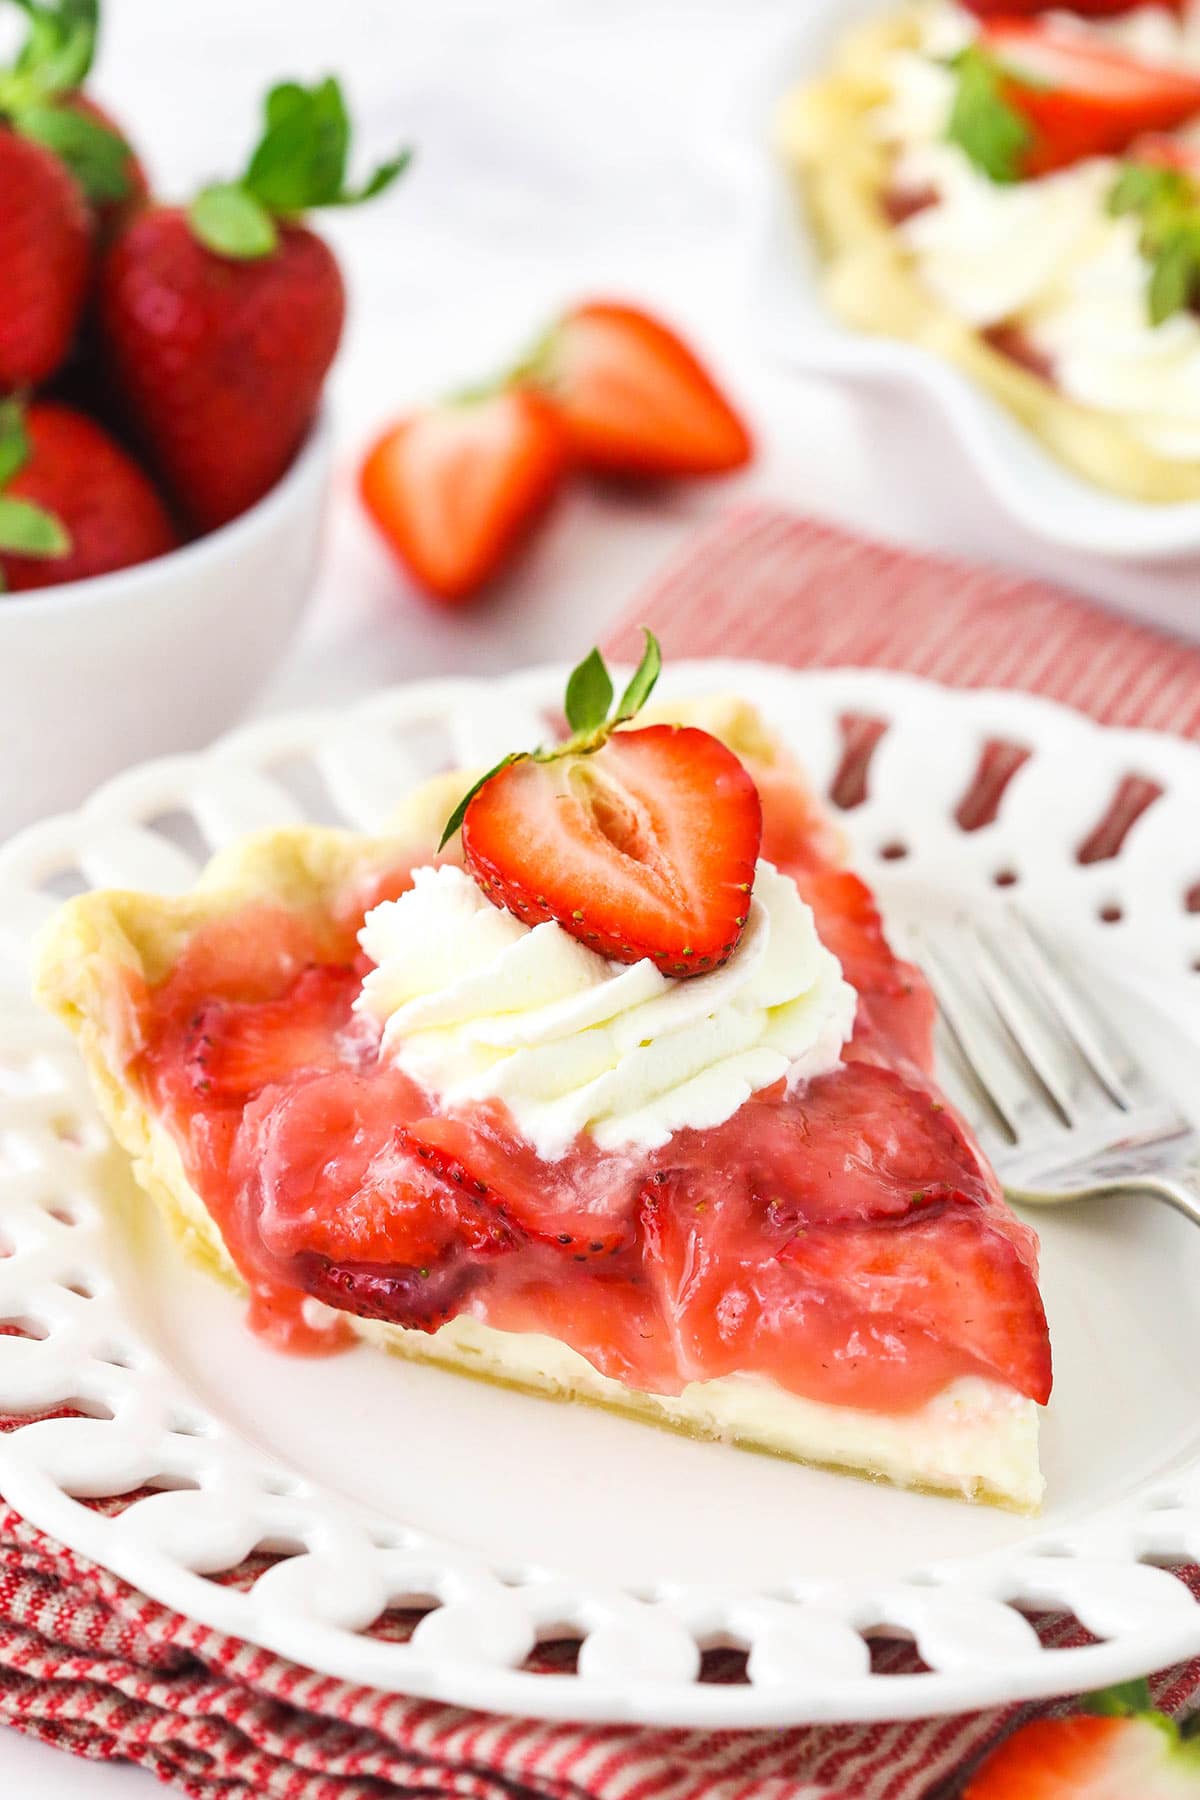 A close-up shot of a slice of strawberry cream pie on a dessert plate with a bowl of fresh berries in the background